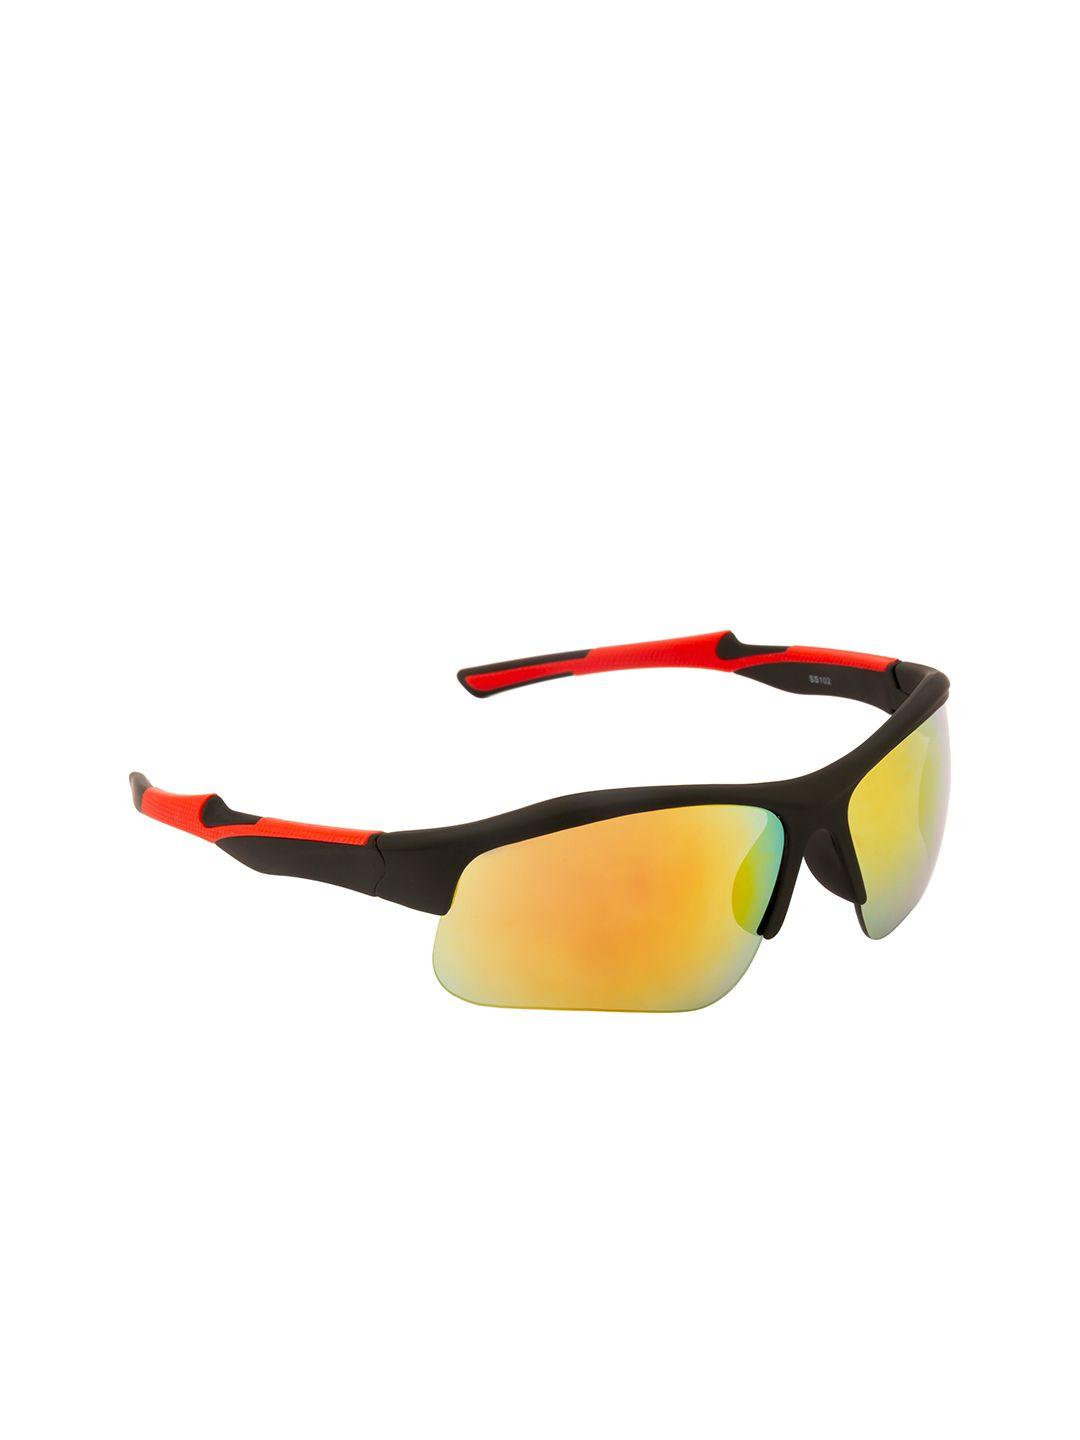 clark n palmer unisex mirrored lens & black sports sunglasses with uv protected lens